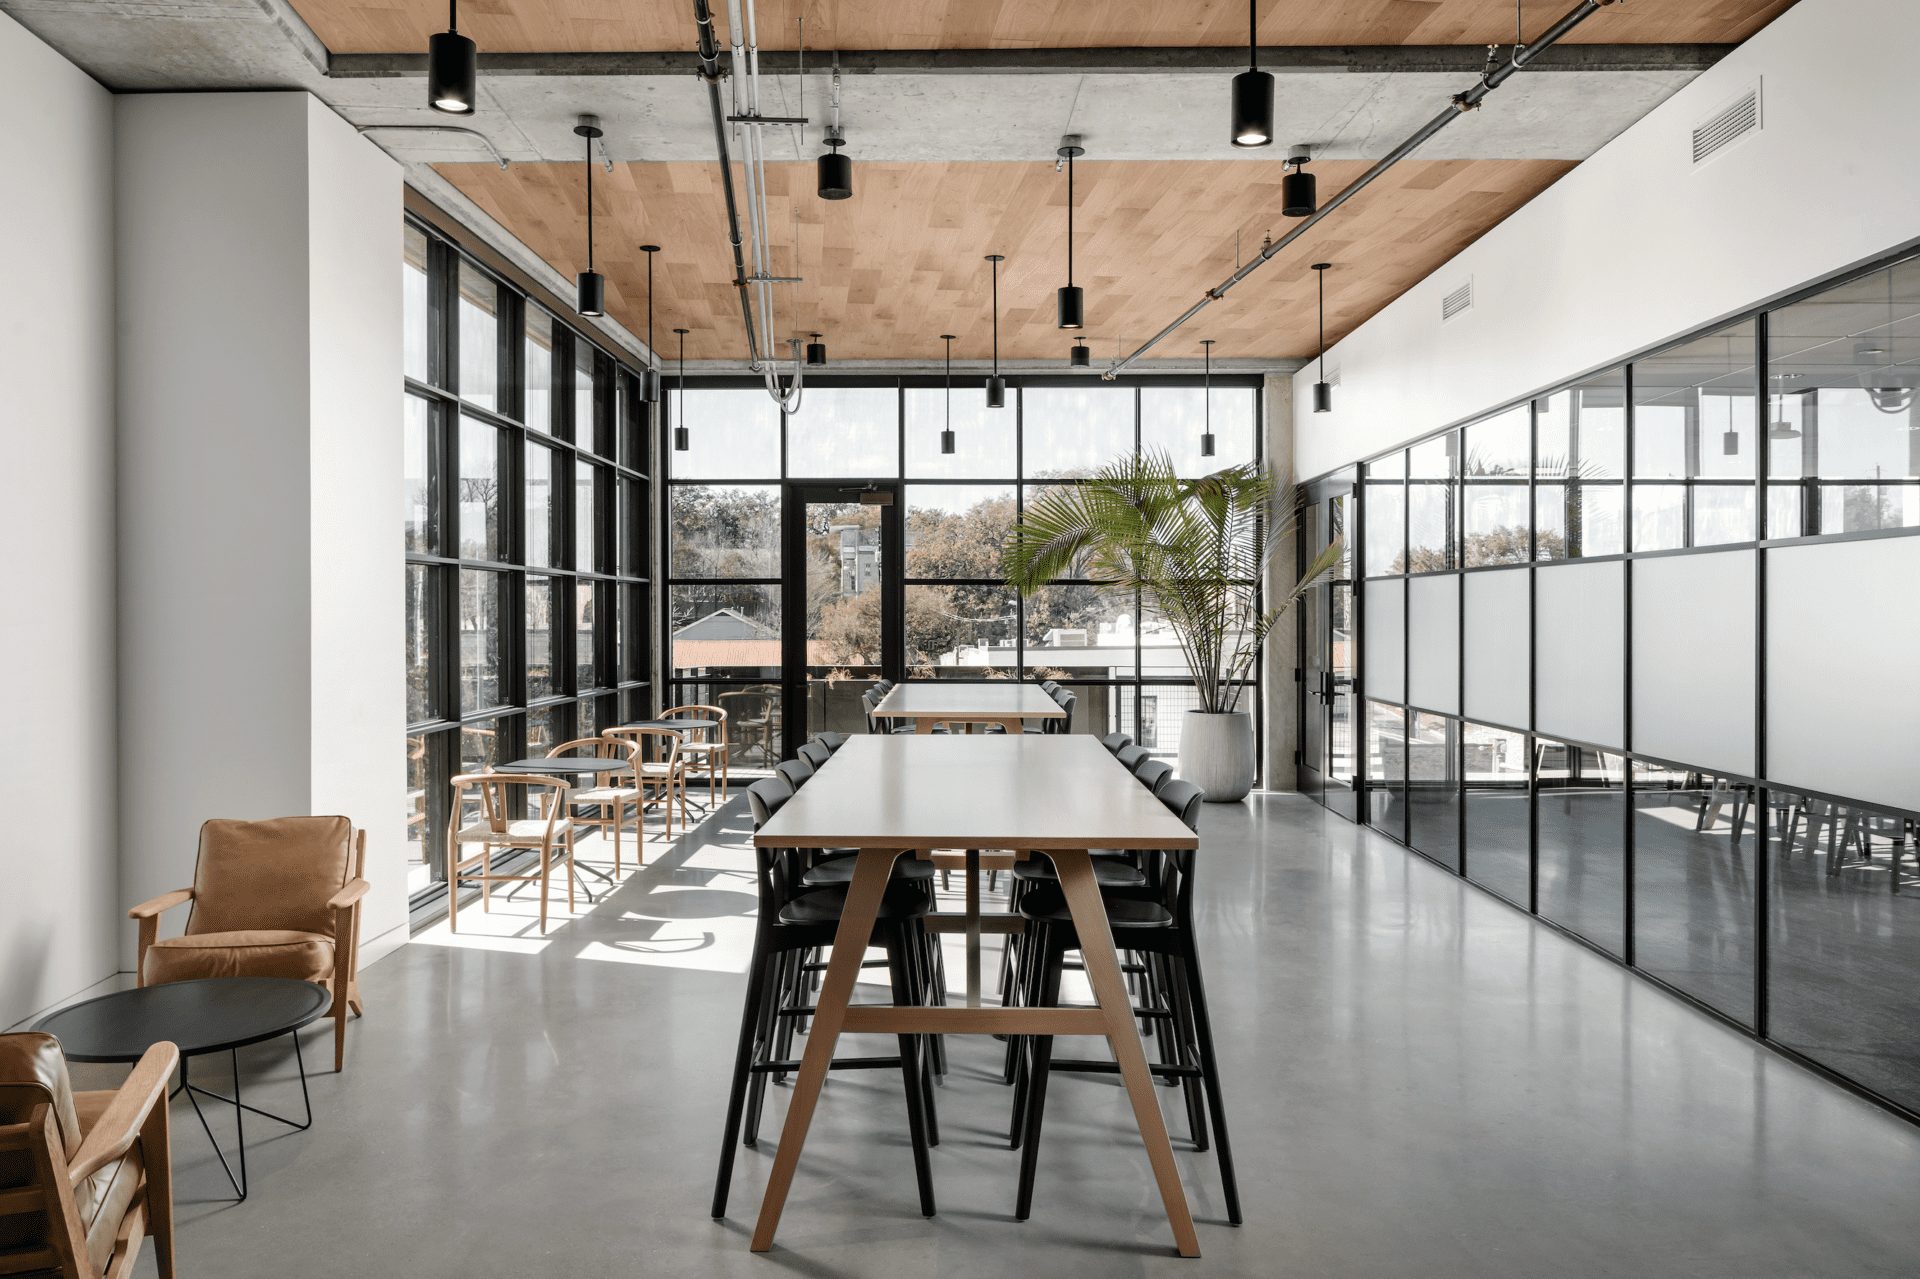 Perkins&Will, frog design, Austin, Texas, post-Covid office, workplace design, office design, industrial interiors OnOffice magazine